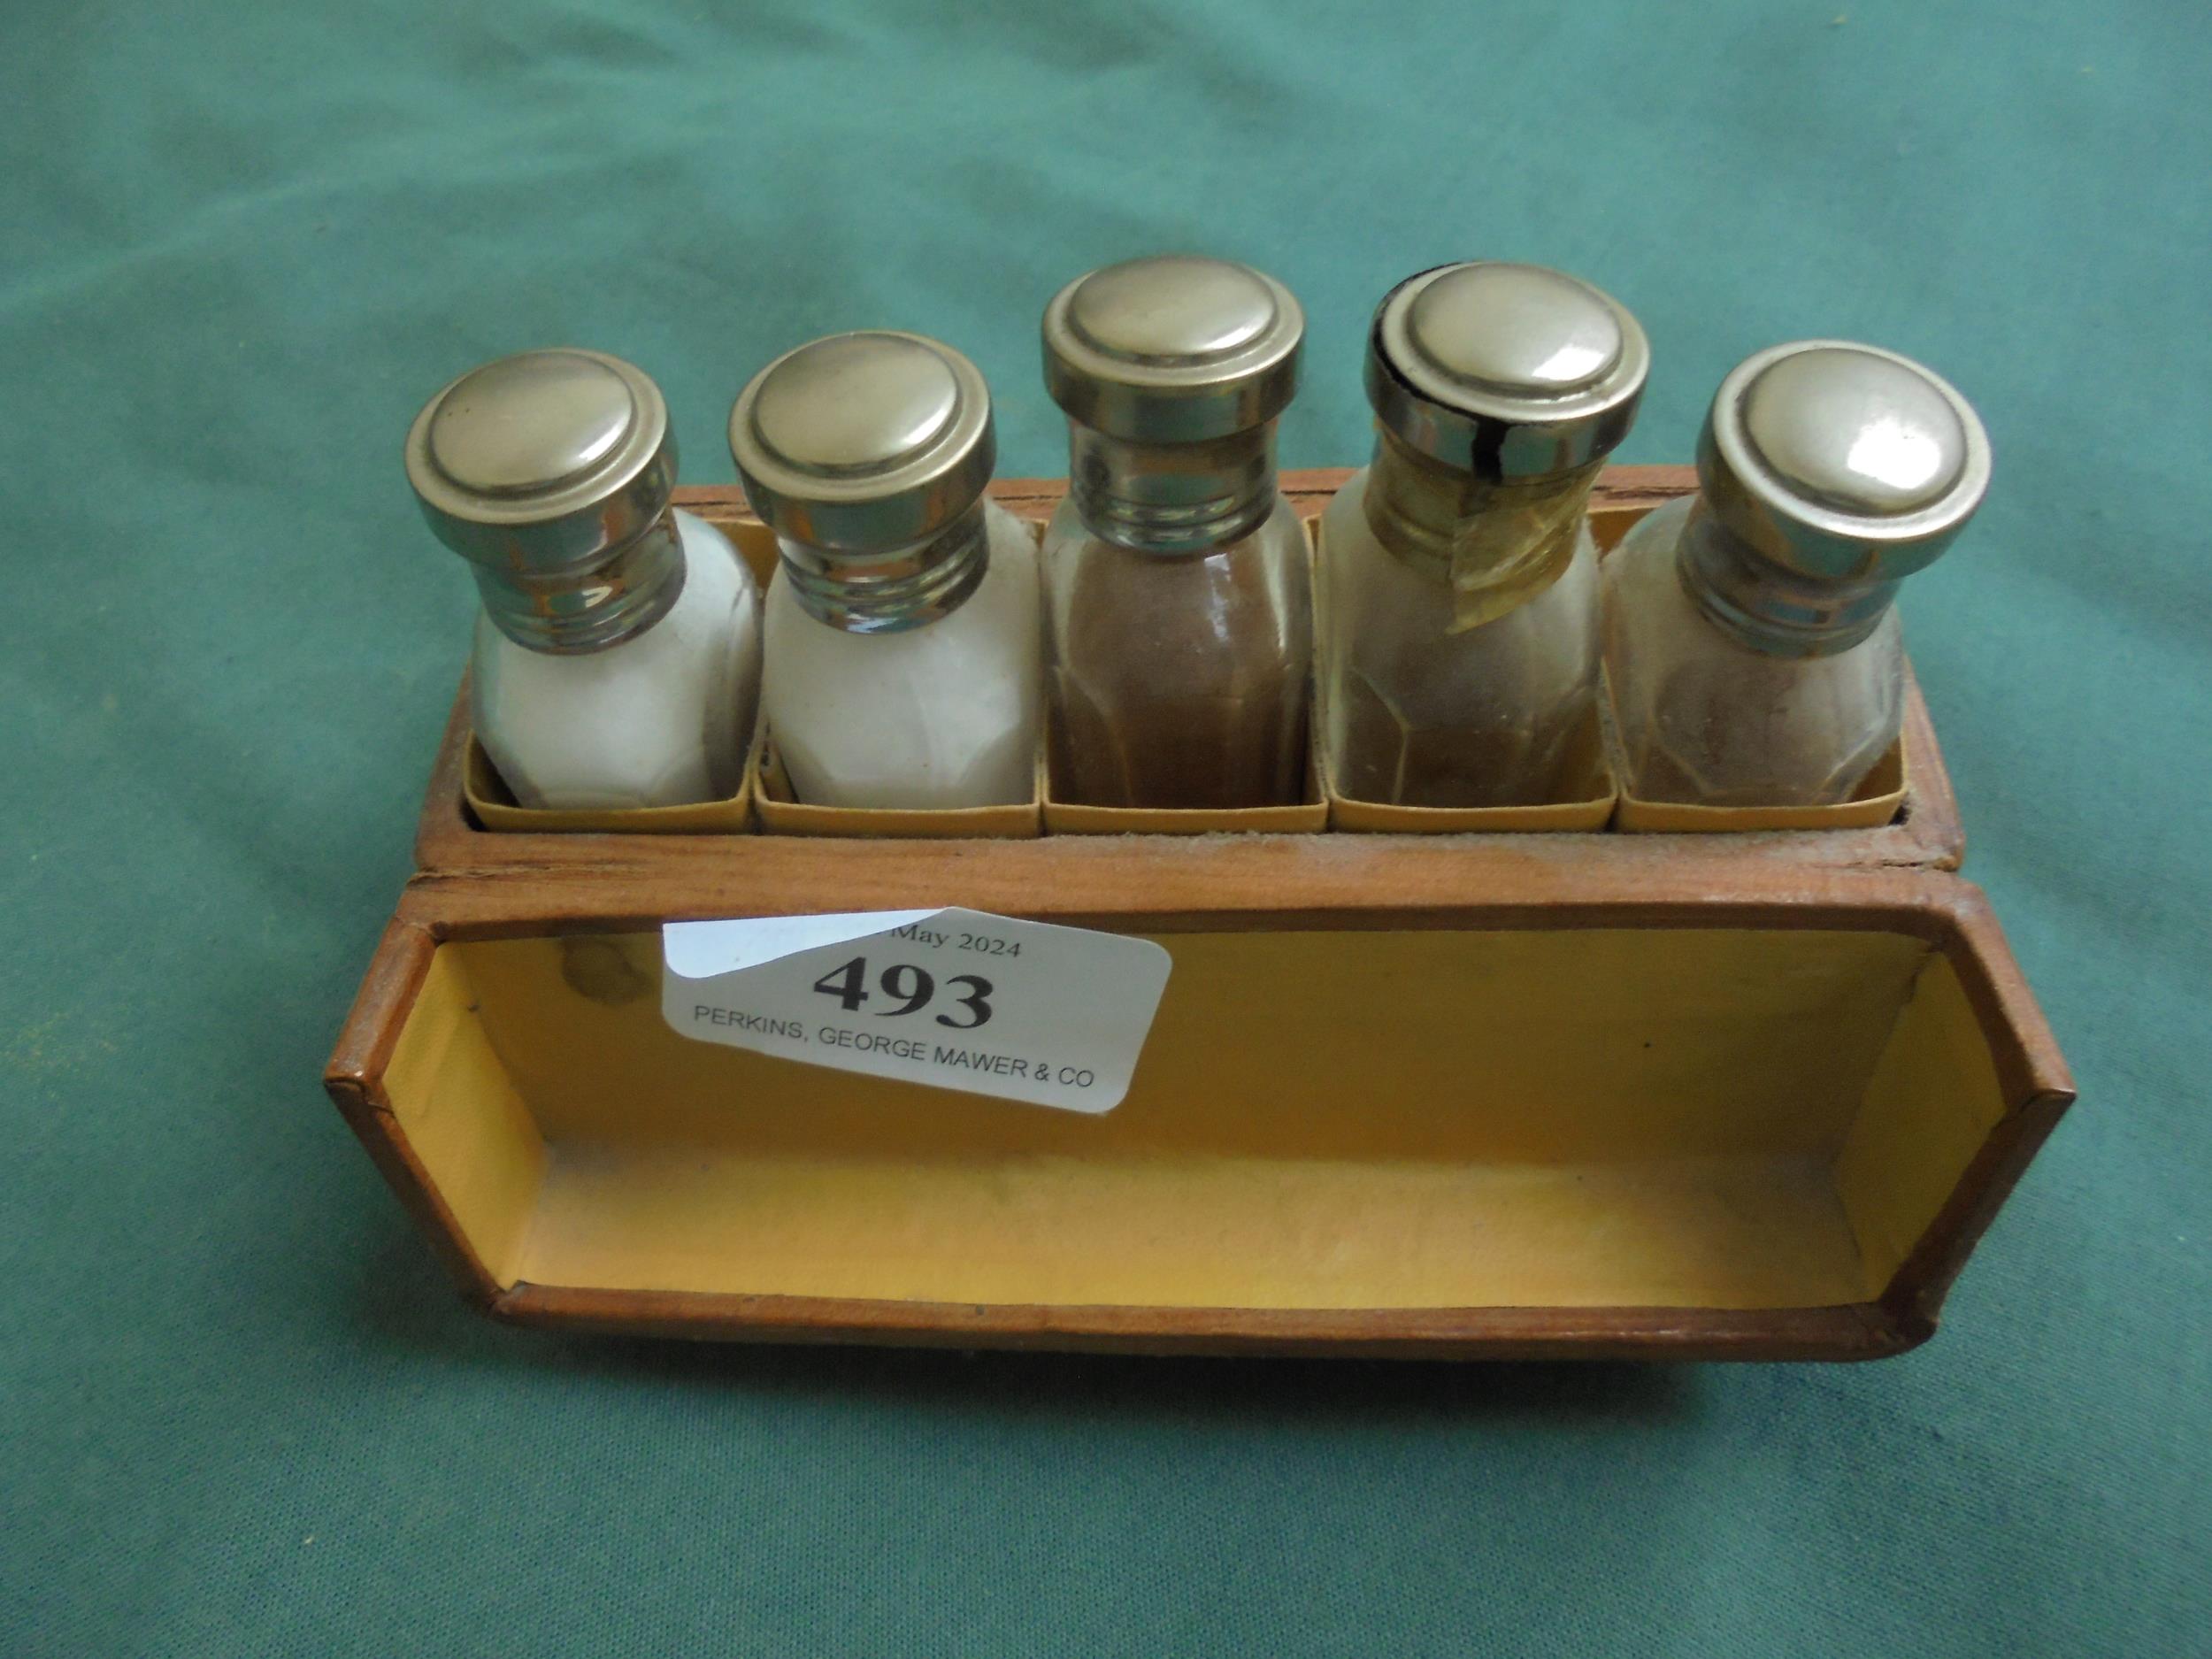 Small leather travelling box containing 5 perfume bottles